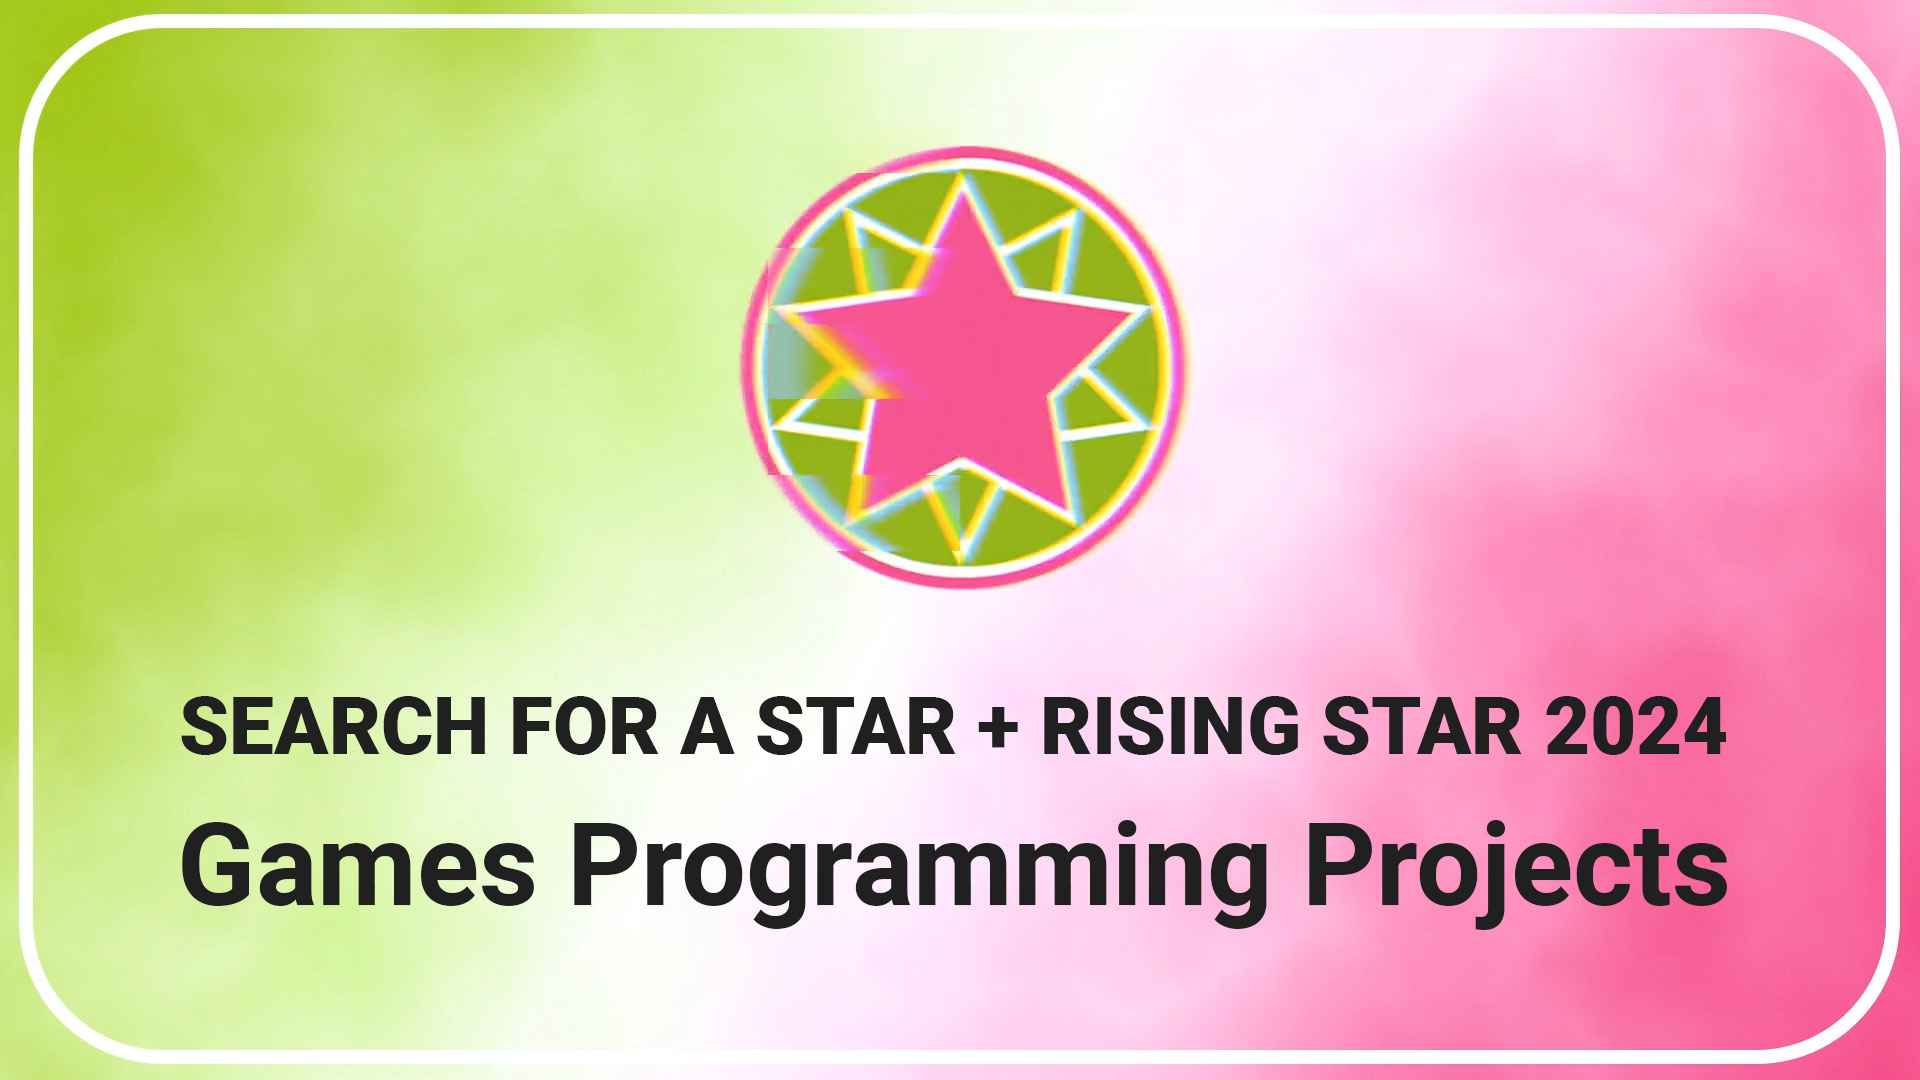 Games Programming Projects | Search For A Star 2024